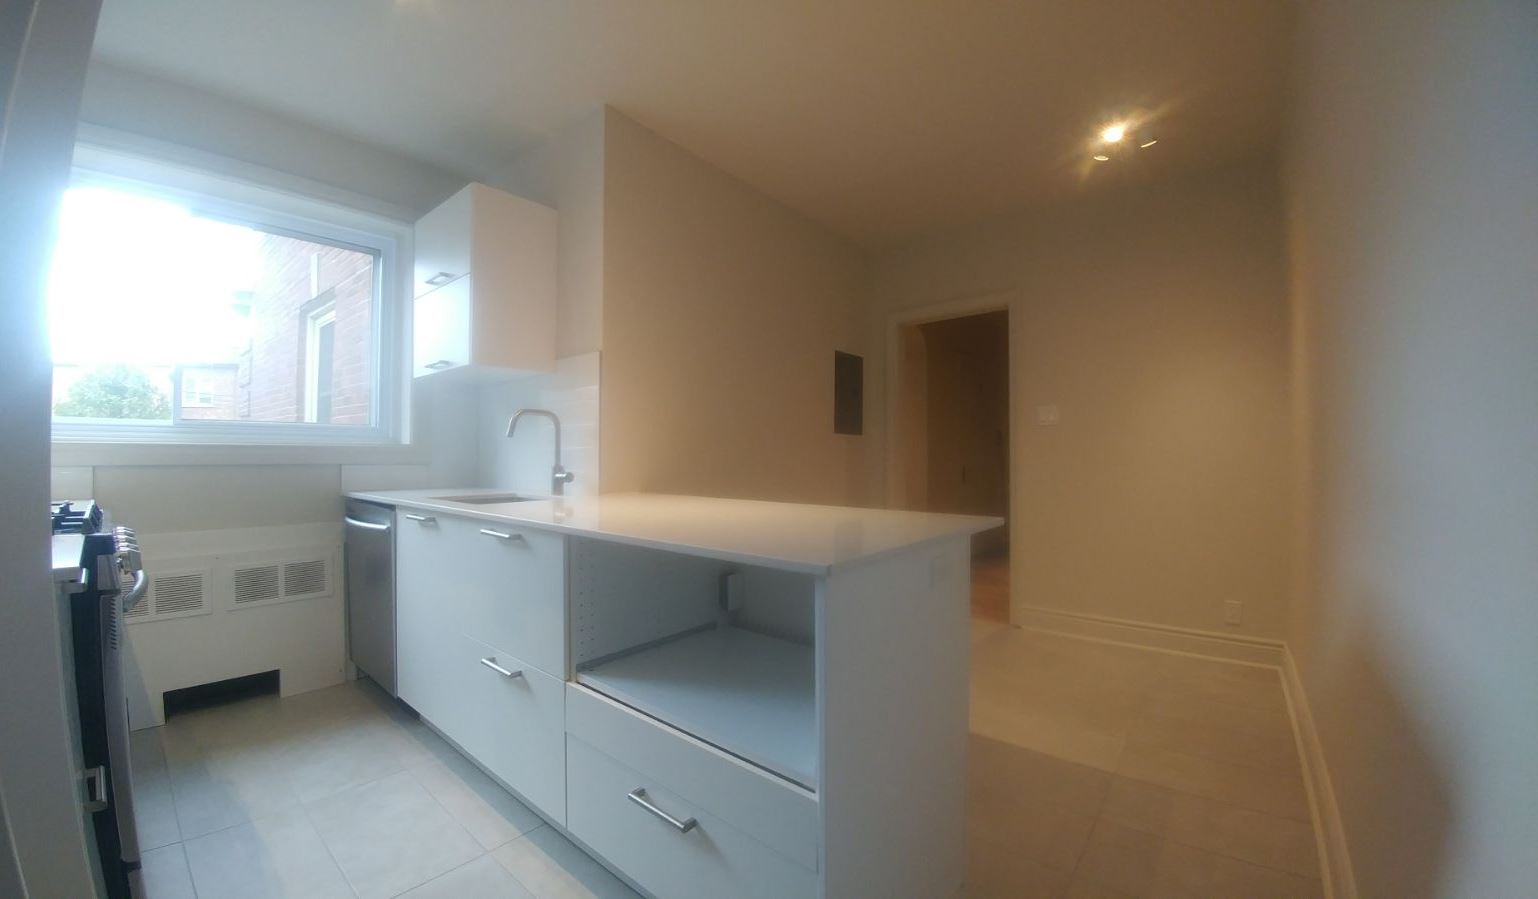 2 bedroom Apartments for rent in Hampstead at 1-2 Ellerdale - Photo 12 - RentQuebecApartments – L9523